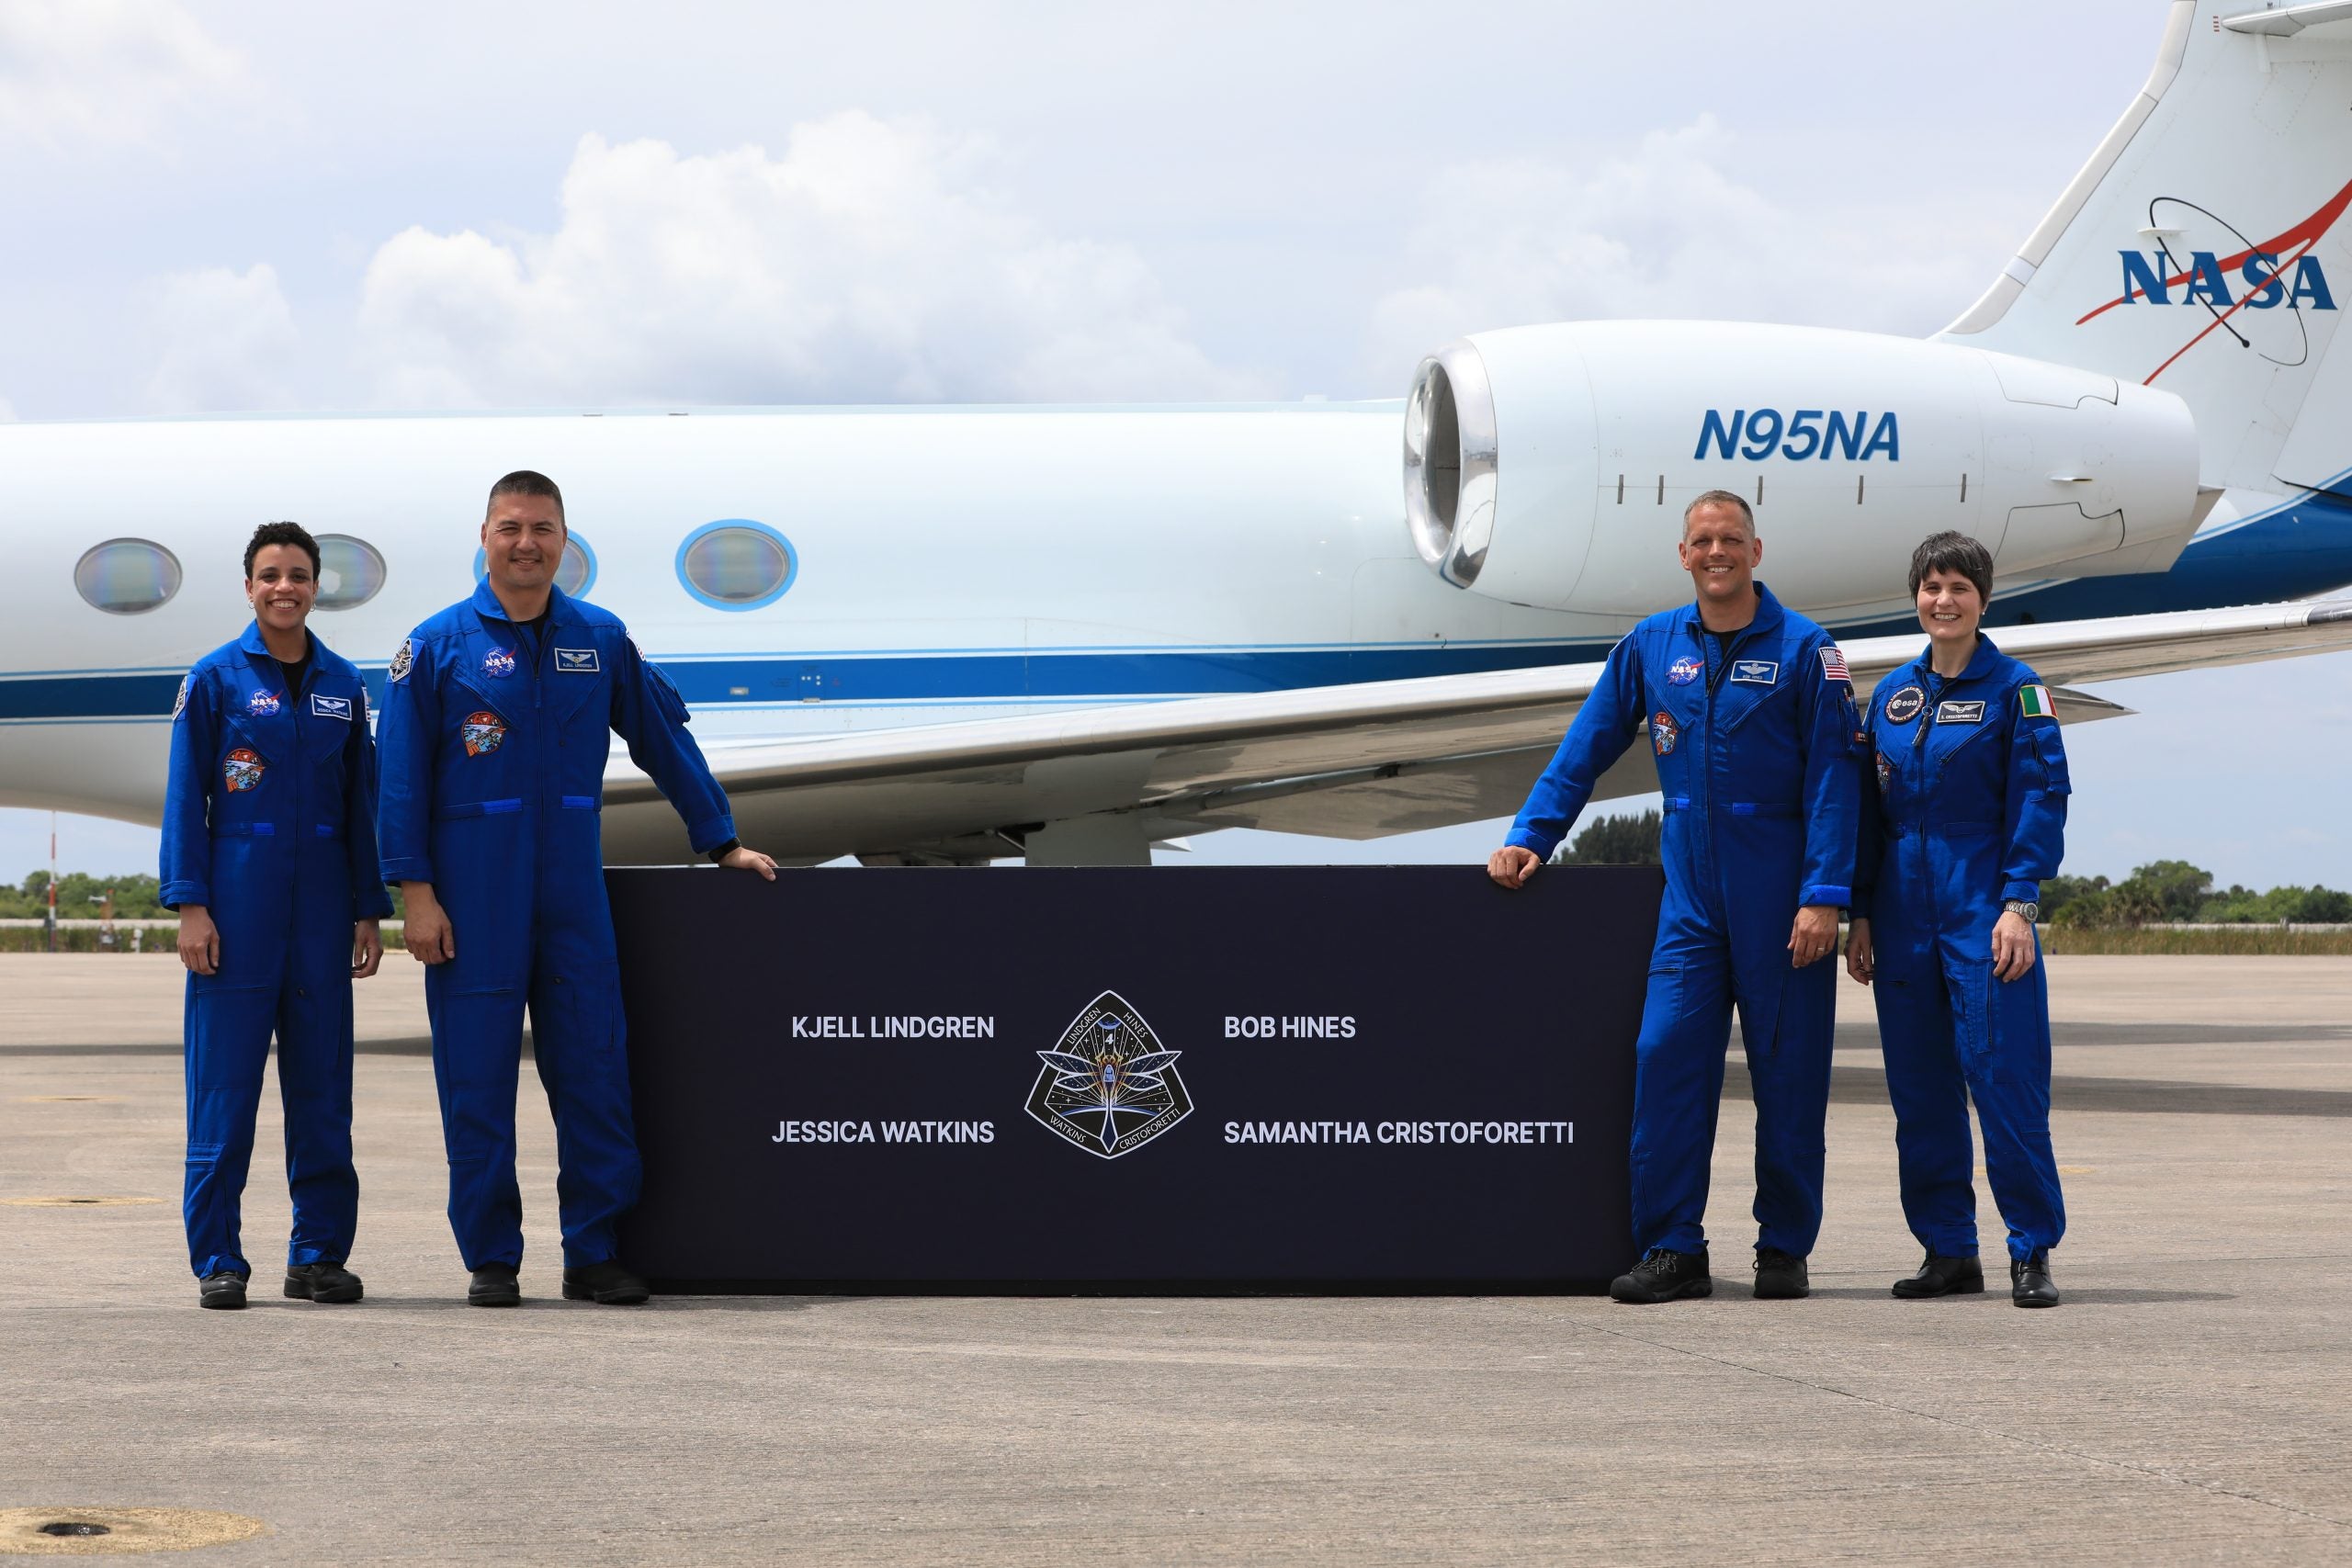 Members of the Crew-4 mission went into quarantine at the centre's astronaut crew quarters back in April in preparation for launch. (Photo: NASA/Kim Shiflett)